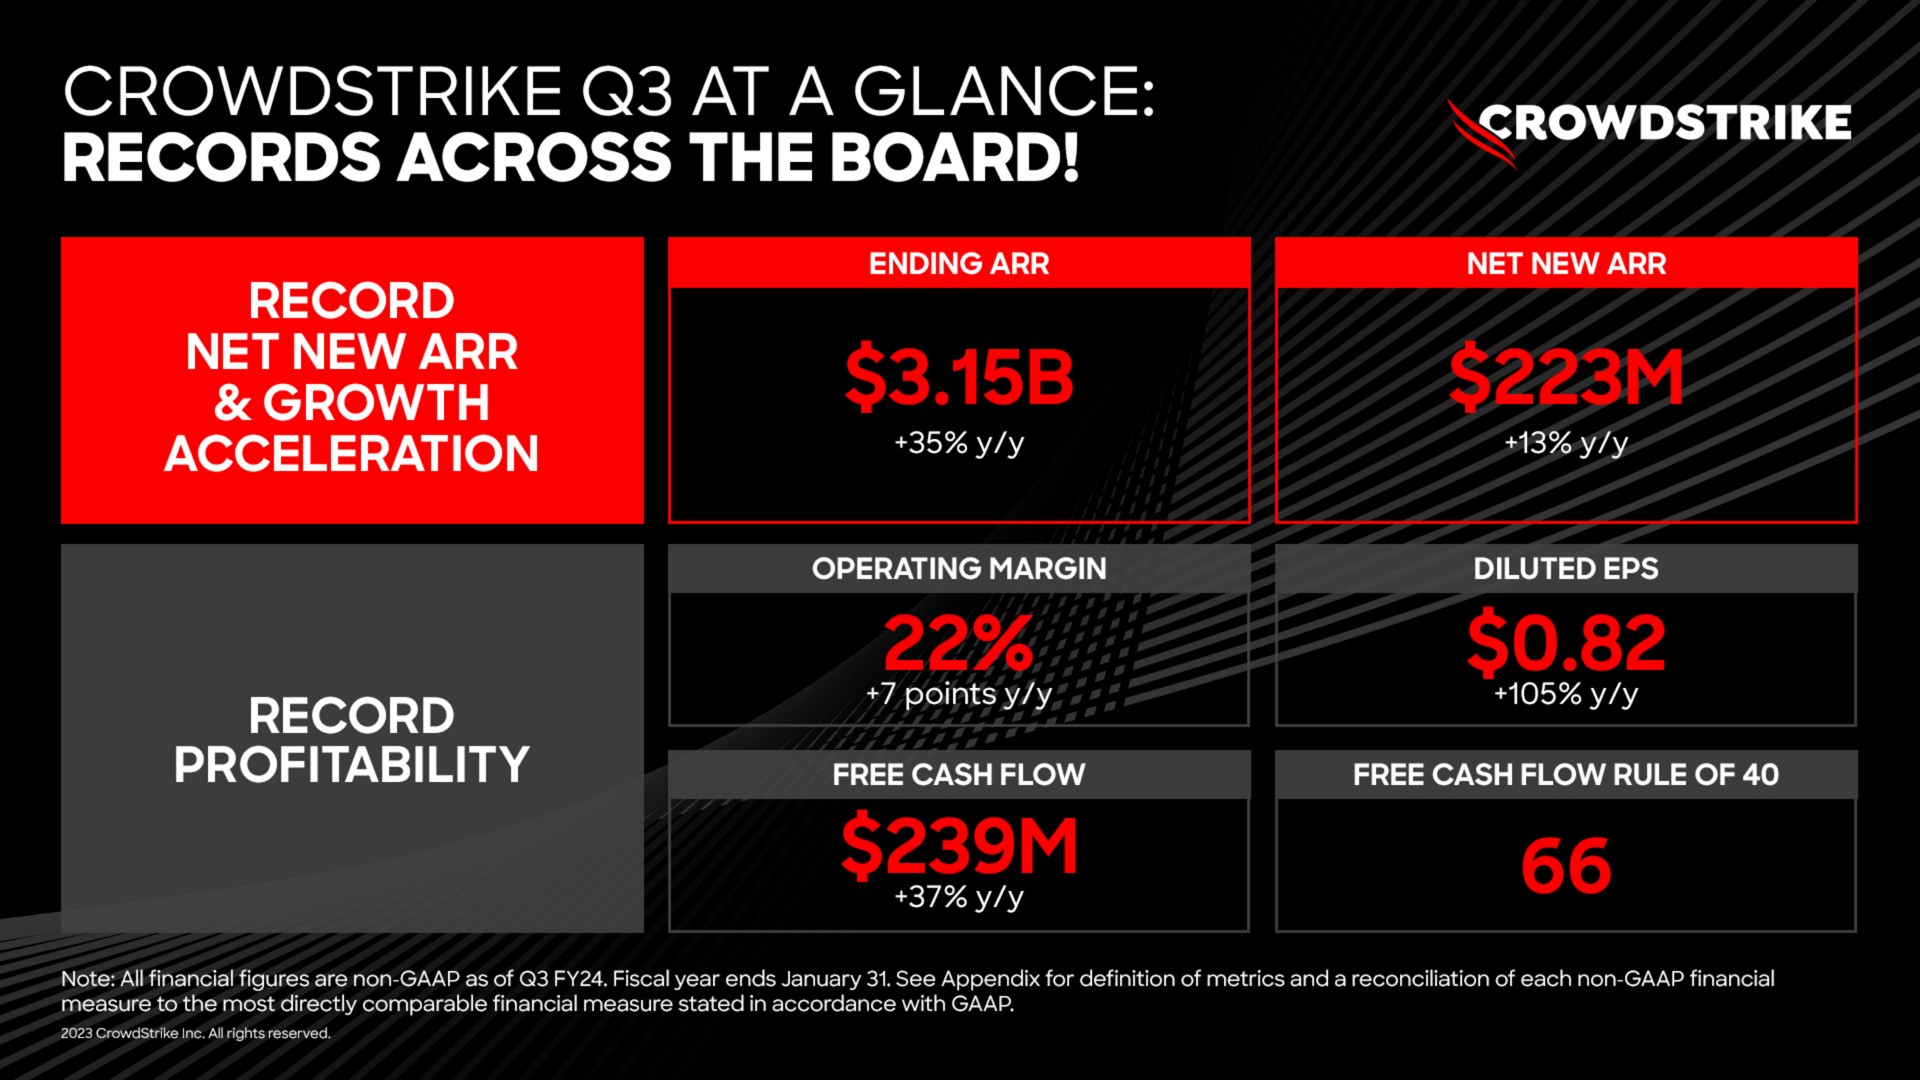 at a glance records across the board record net new growth acceleration record profitability a operating margin diluted points free cash flow free cash flow rule of | Crowdstrike